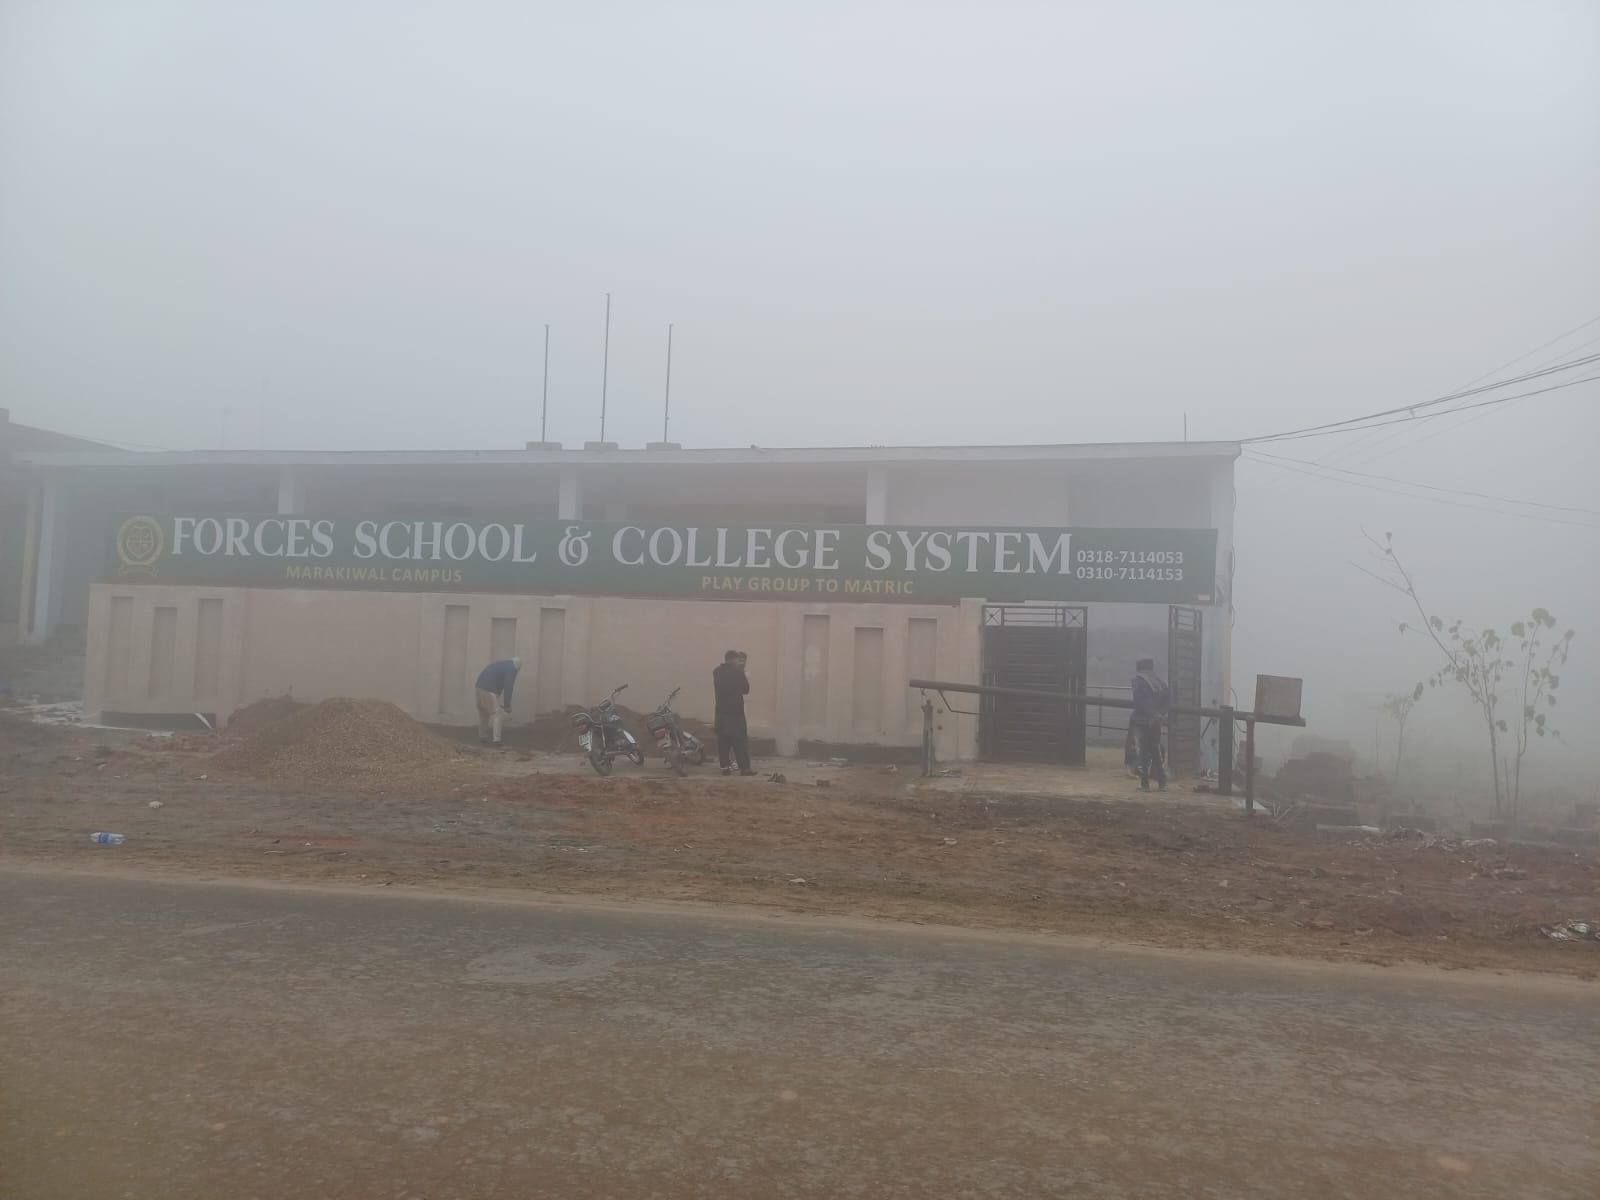 Marakiwal Campus Sialkot in the final phase of construction